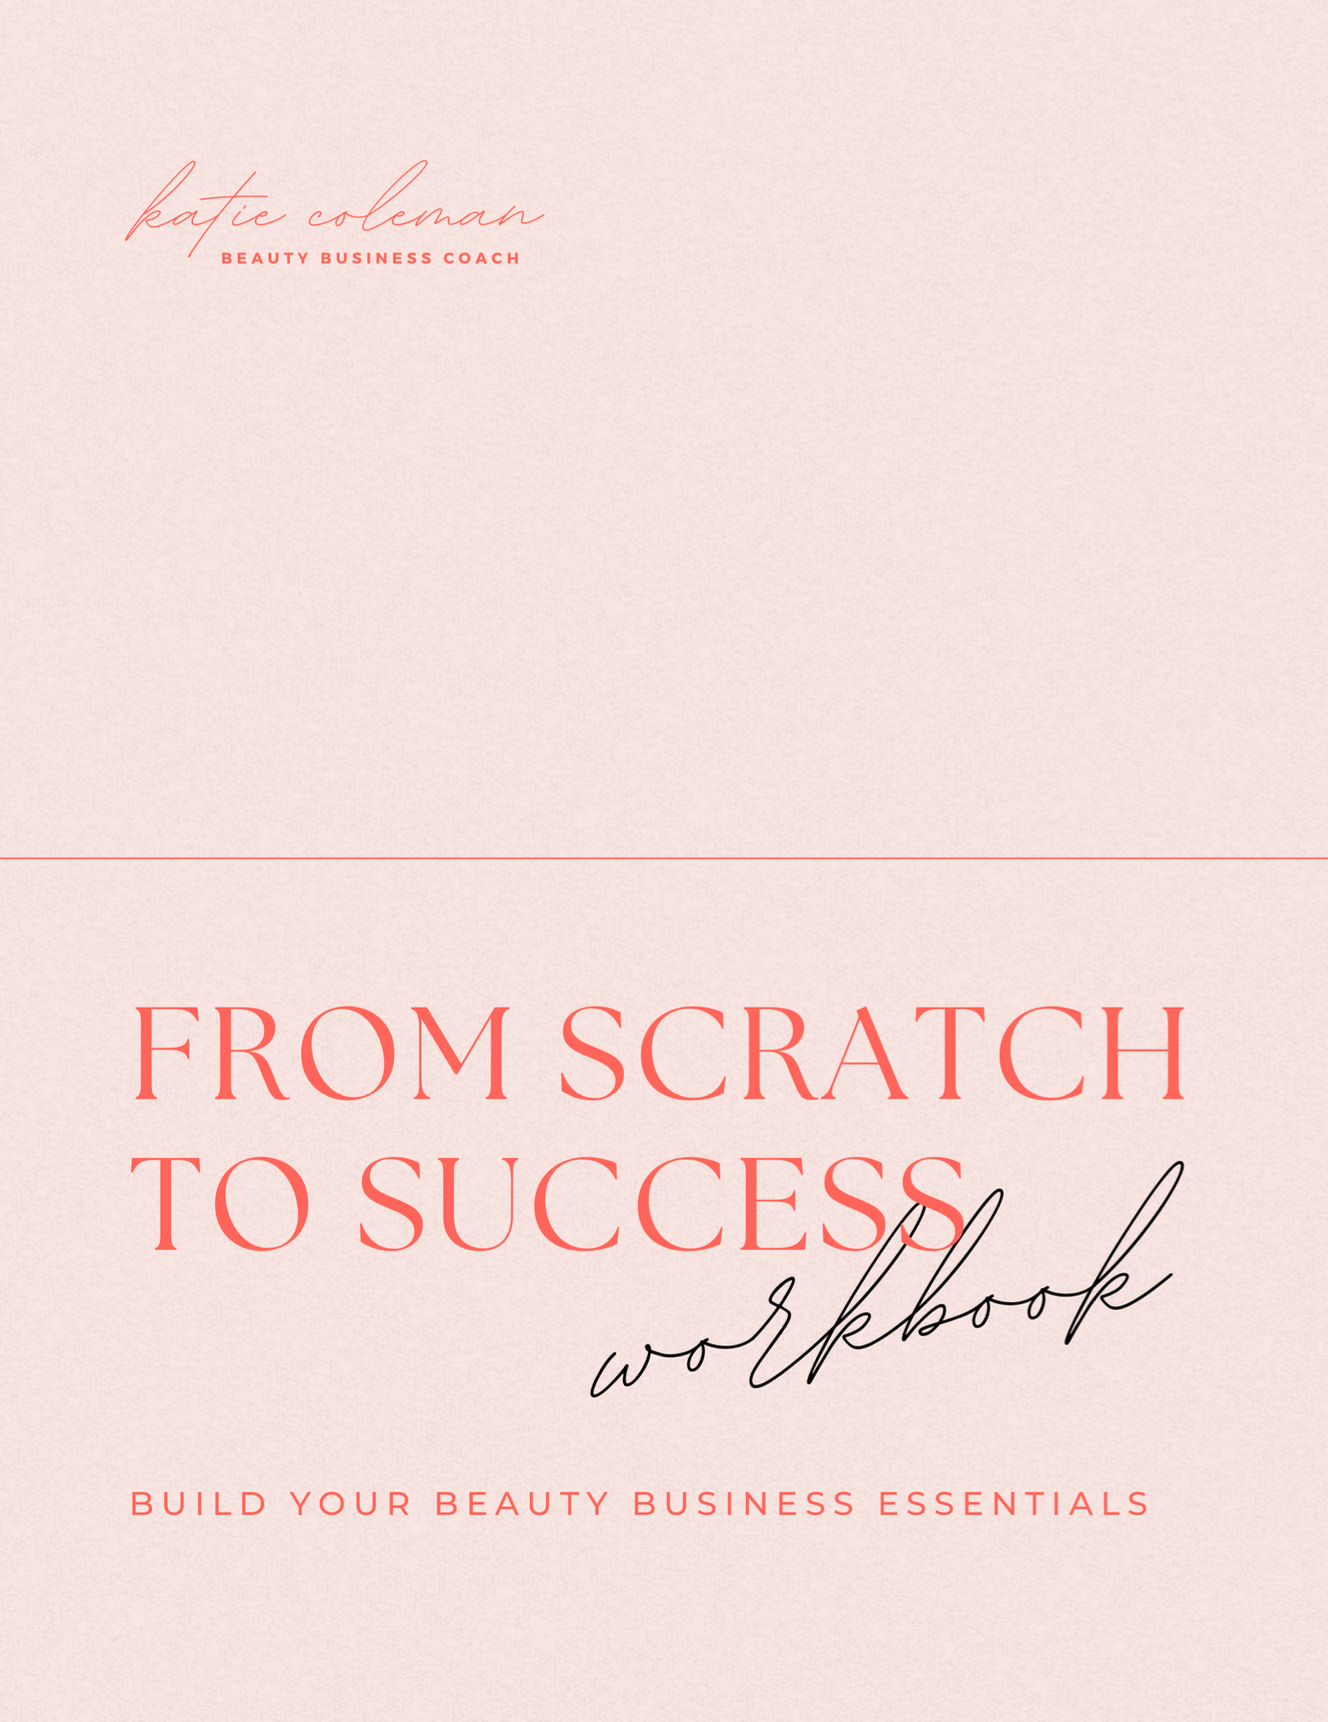 From Scratch to Success Step-by-Step Guide - Katie Winkler Makeup Artist